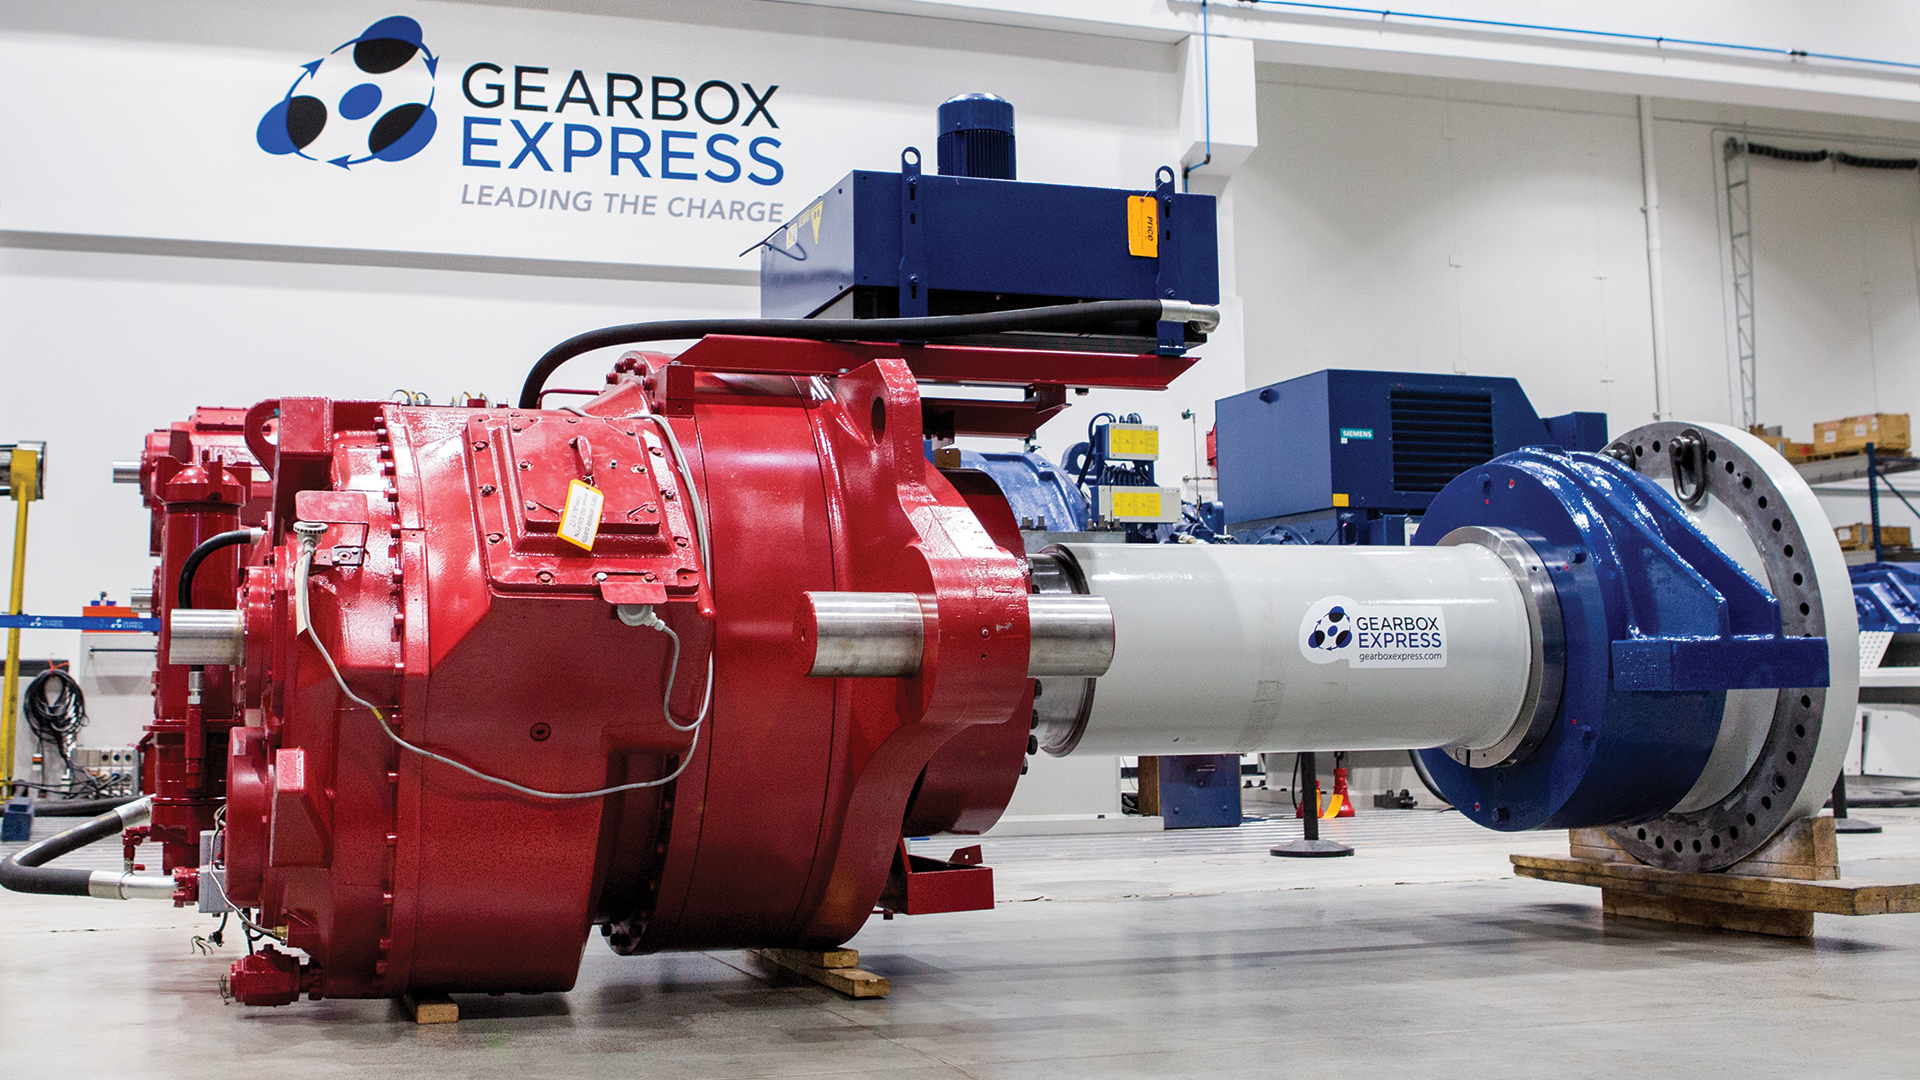 Gearbox Express March 15, 2013